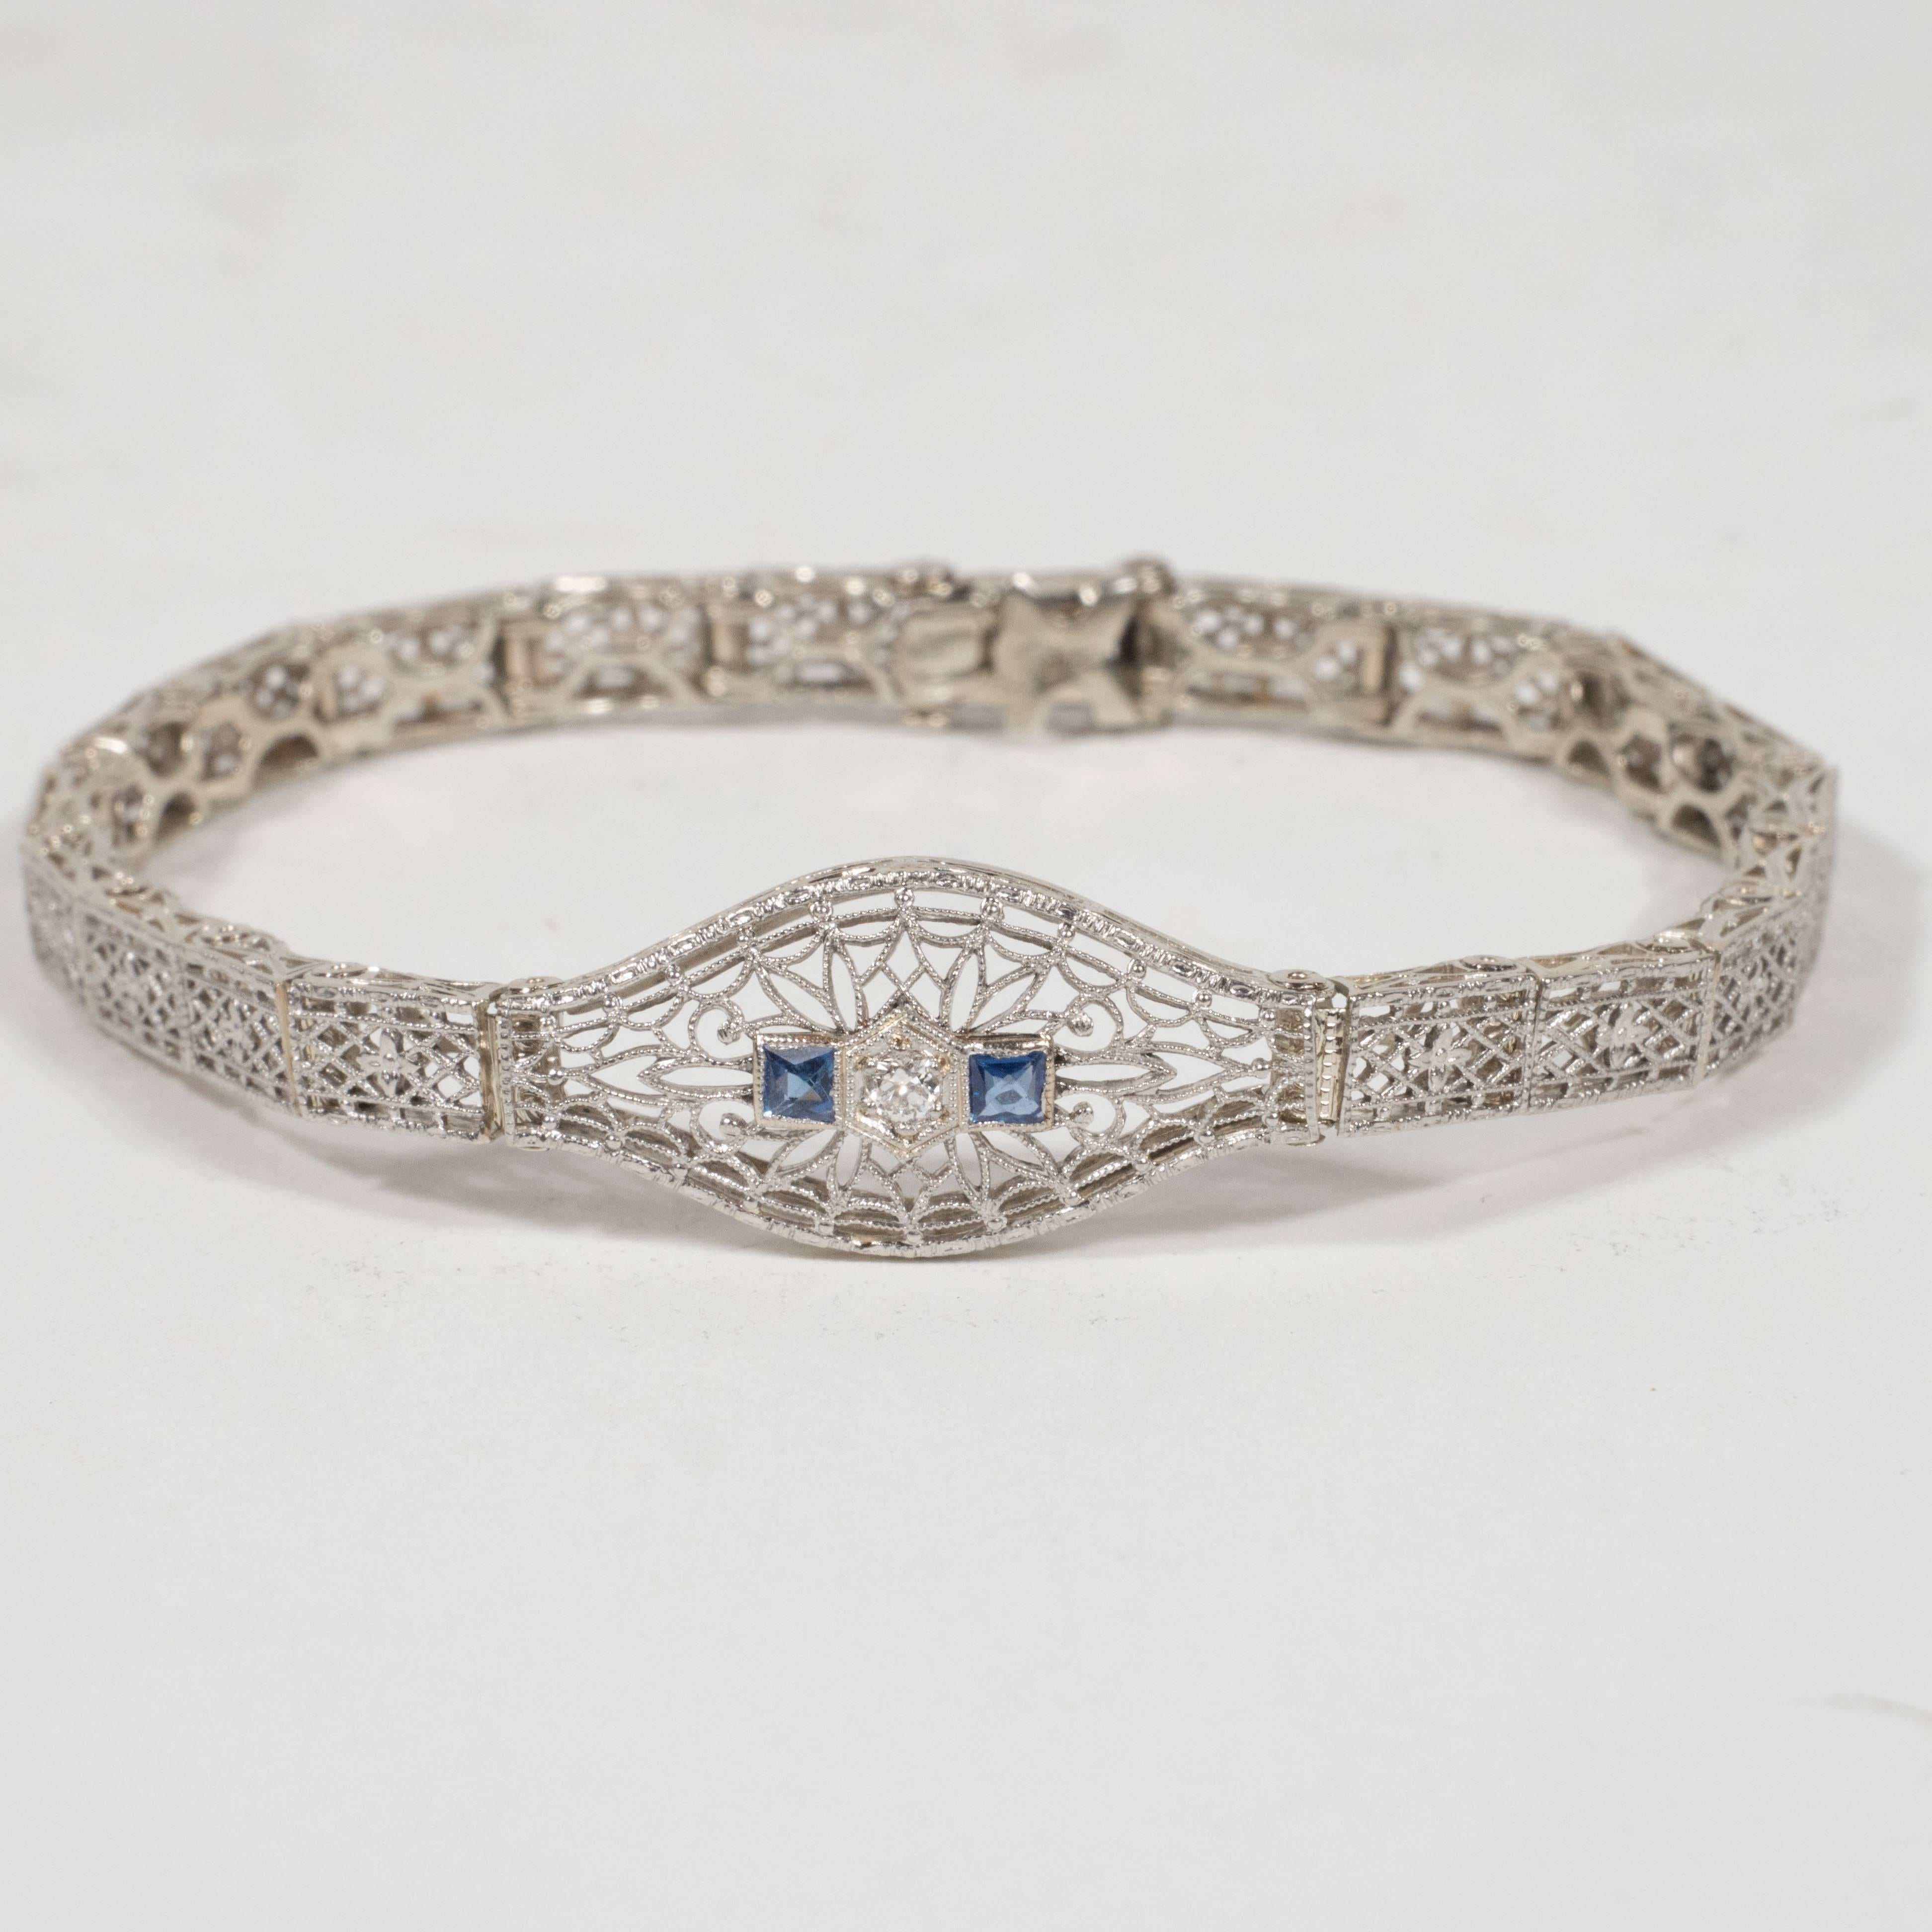 This gorgeous Art Deco bracelet features a central three point old mine cut diamond placed in a hexagonal shaped setting which is flanked by two square cut synthetic sapphires on either side. The central link offers a wealth of baroque patterns,